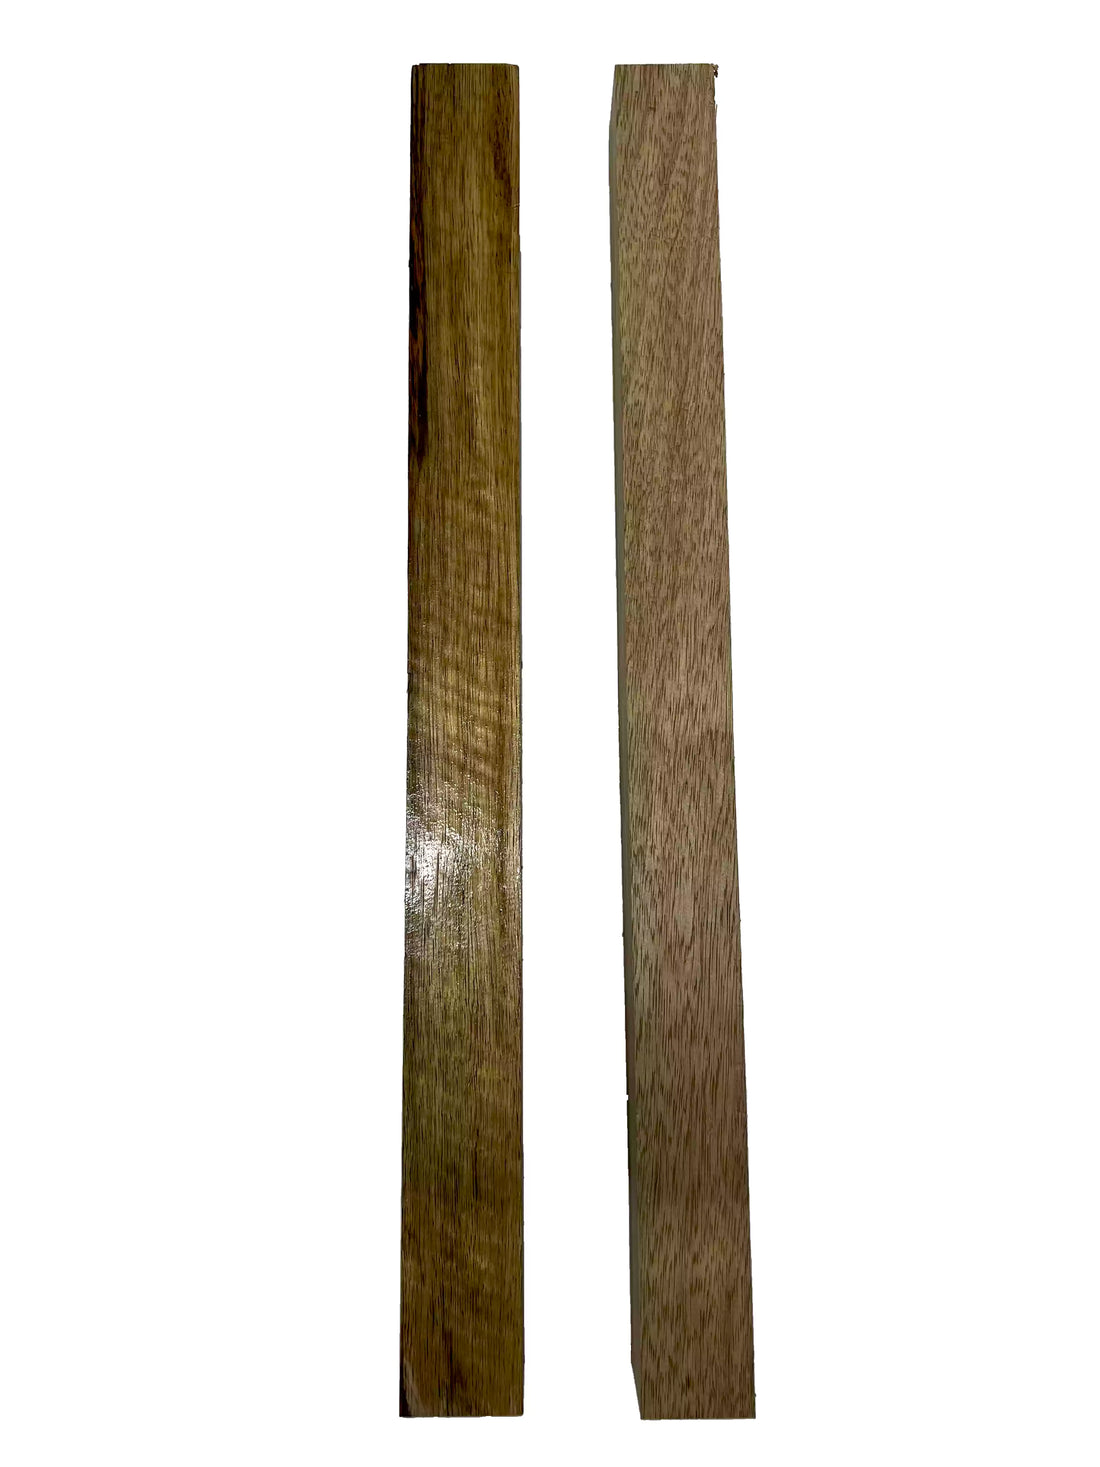 Pack of 2, Black Limba Turning Wood Blanks 21&quot; x 1-7/8&quot; x 3/4&quot; 